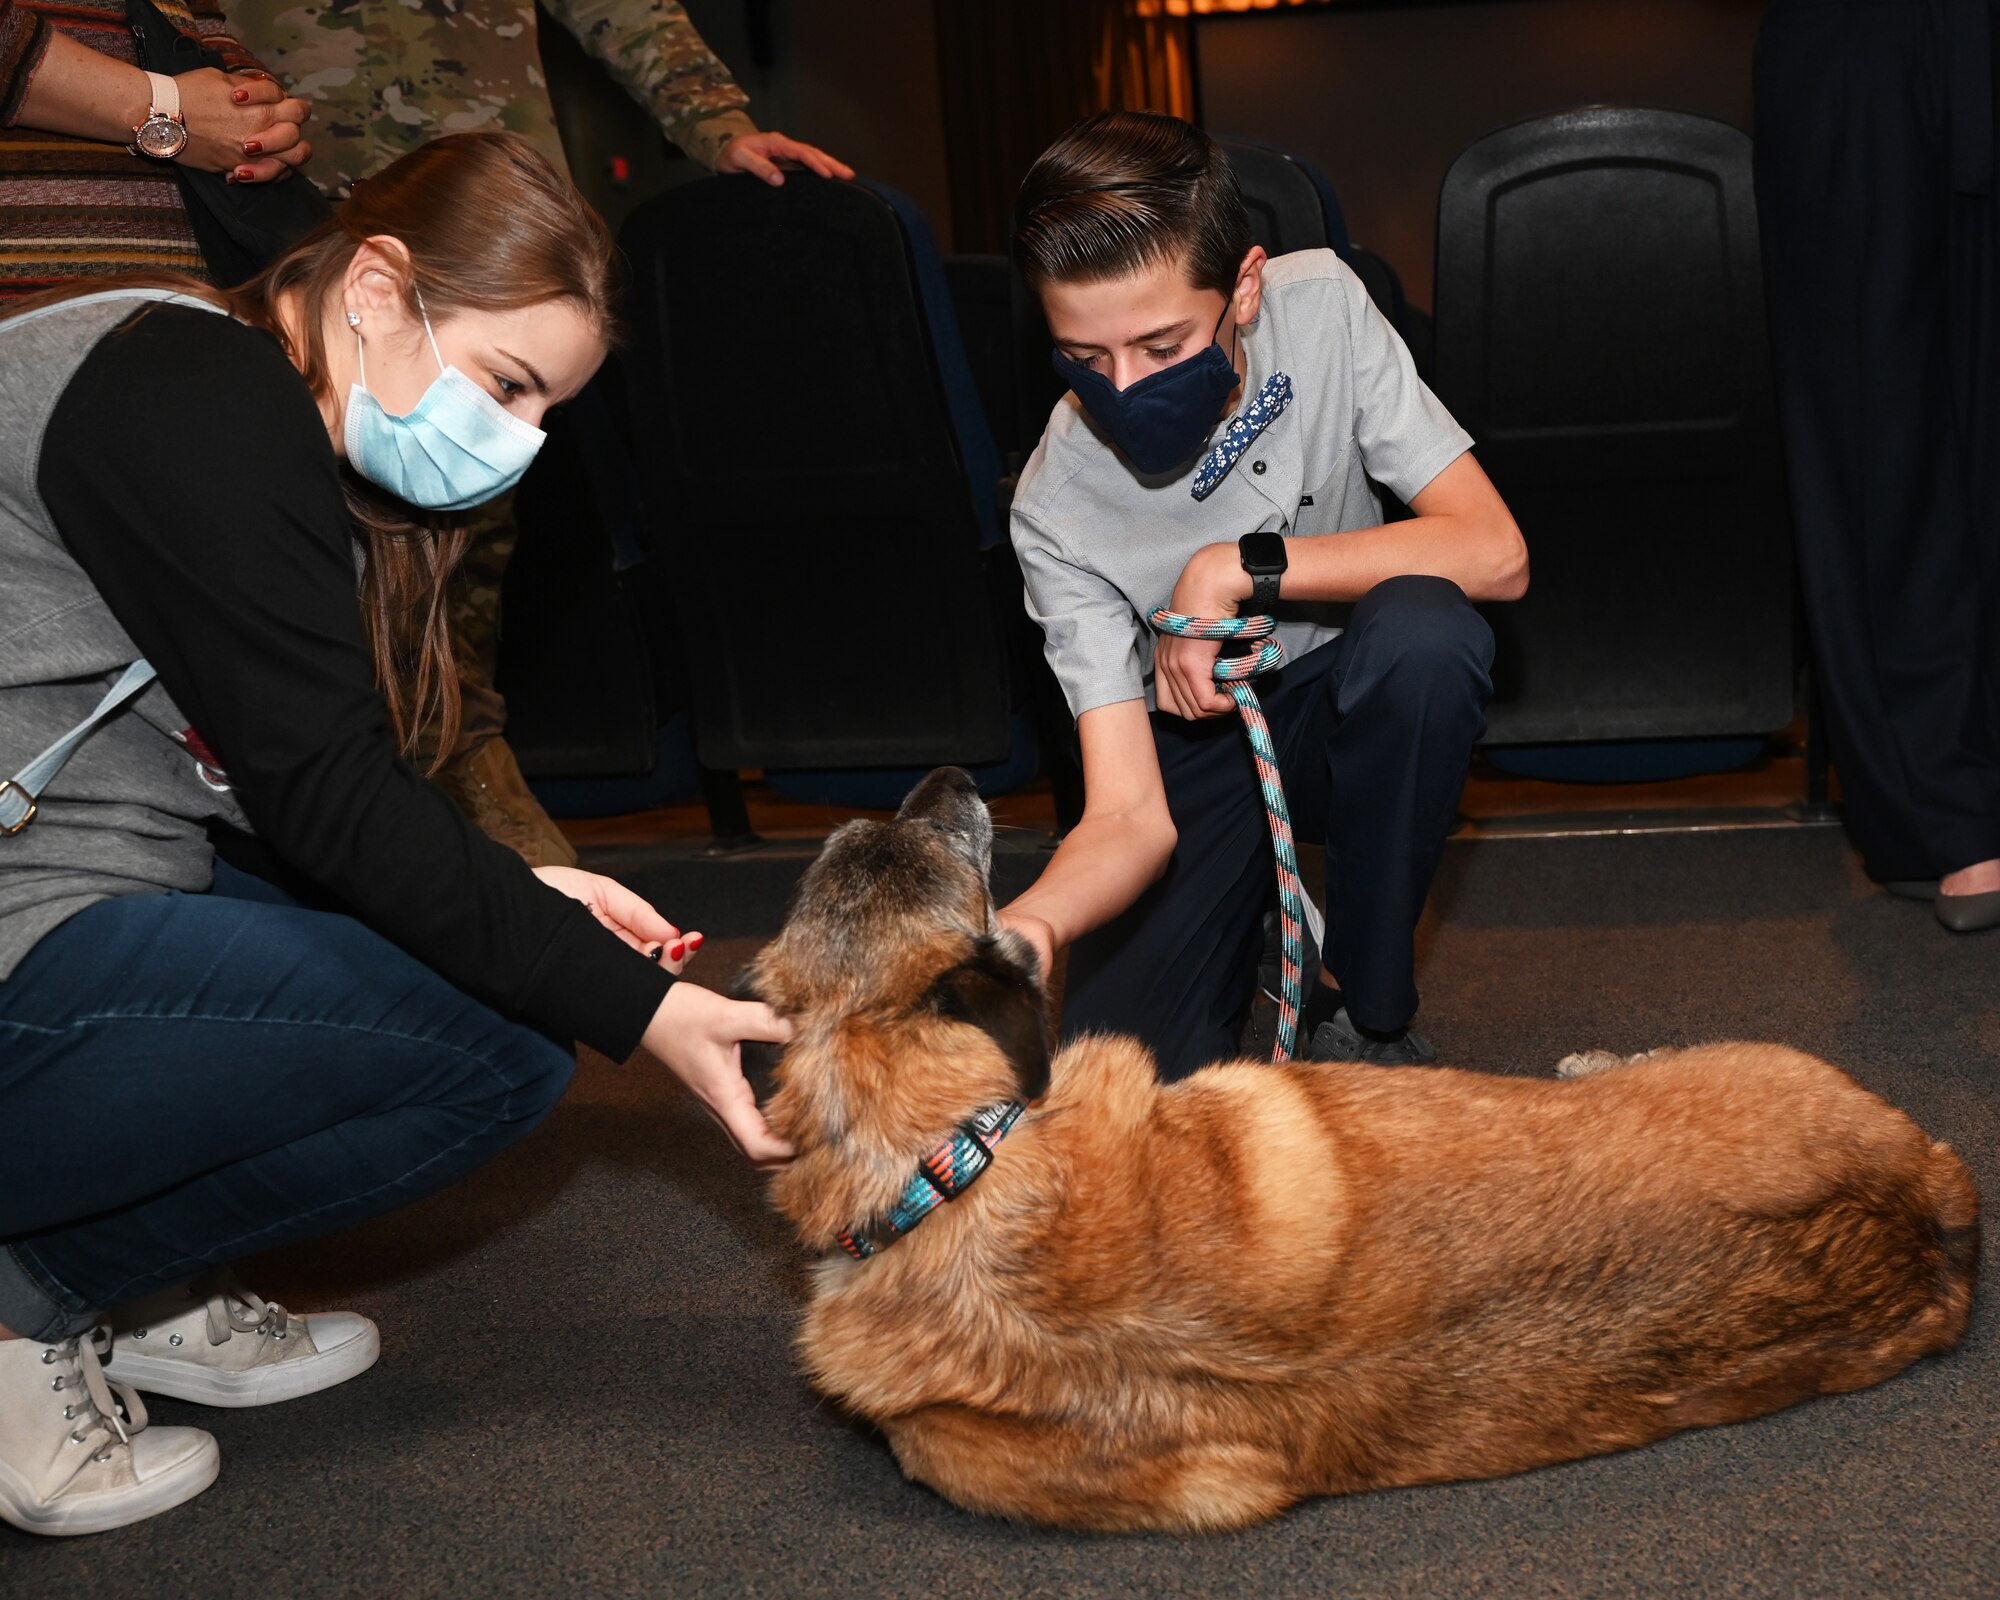 17th Security Forces Squadron Military Working Dog Joy is recognized during her retirement ceremony at the theater on Goodfellow Air Force Base, Dec. 20. Joy has been living with the Reilman family since the beginning of September, 2021. (U.S. Air Force photo by Senior Airman Michael Bowman)